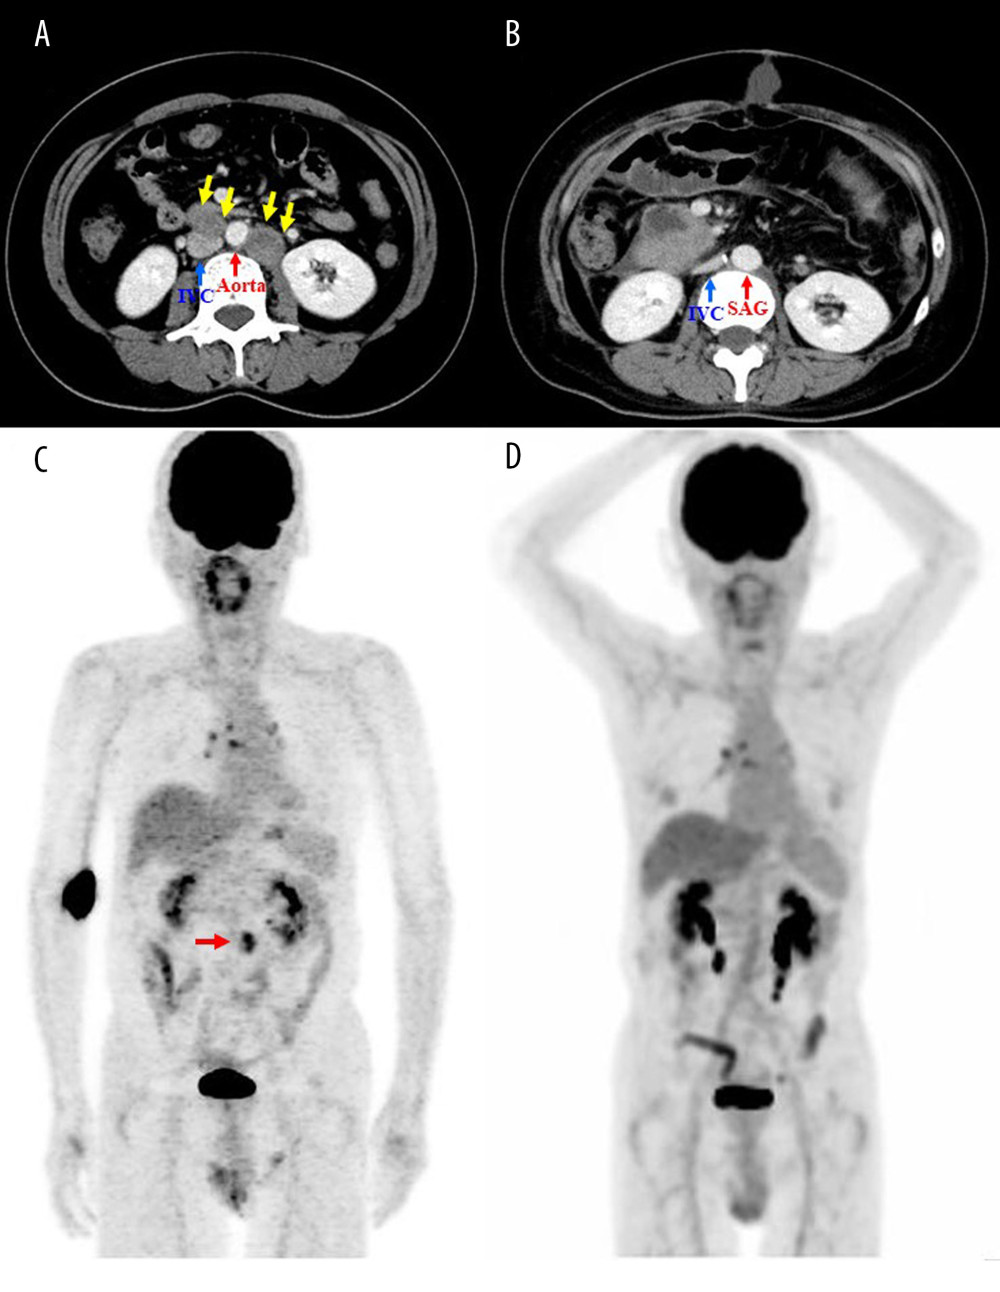 Graphical and surgical curability as institutional indication of aggressive resection of PPT. (A, B) Actual findings of dynamic computed tomography before aggressive resection of PPTs (yellow arrows, A) and at 10 days after surgery (B) are shown. Graphical and surgical curability was obtained (Case 4). (C, D) Actual findings of 18F-fluorodeoxyglucose positron emission tomography before aggressive resection of PPT (red arrow, C) and at 1 year after surgery (B) are shown. Graphical and surgical curability was obtained (Case 7). IVC – inferior vena cava; PPT – paraaortic and/or pelvic tumor; SAG – synthetic arterial graft.